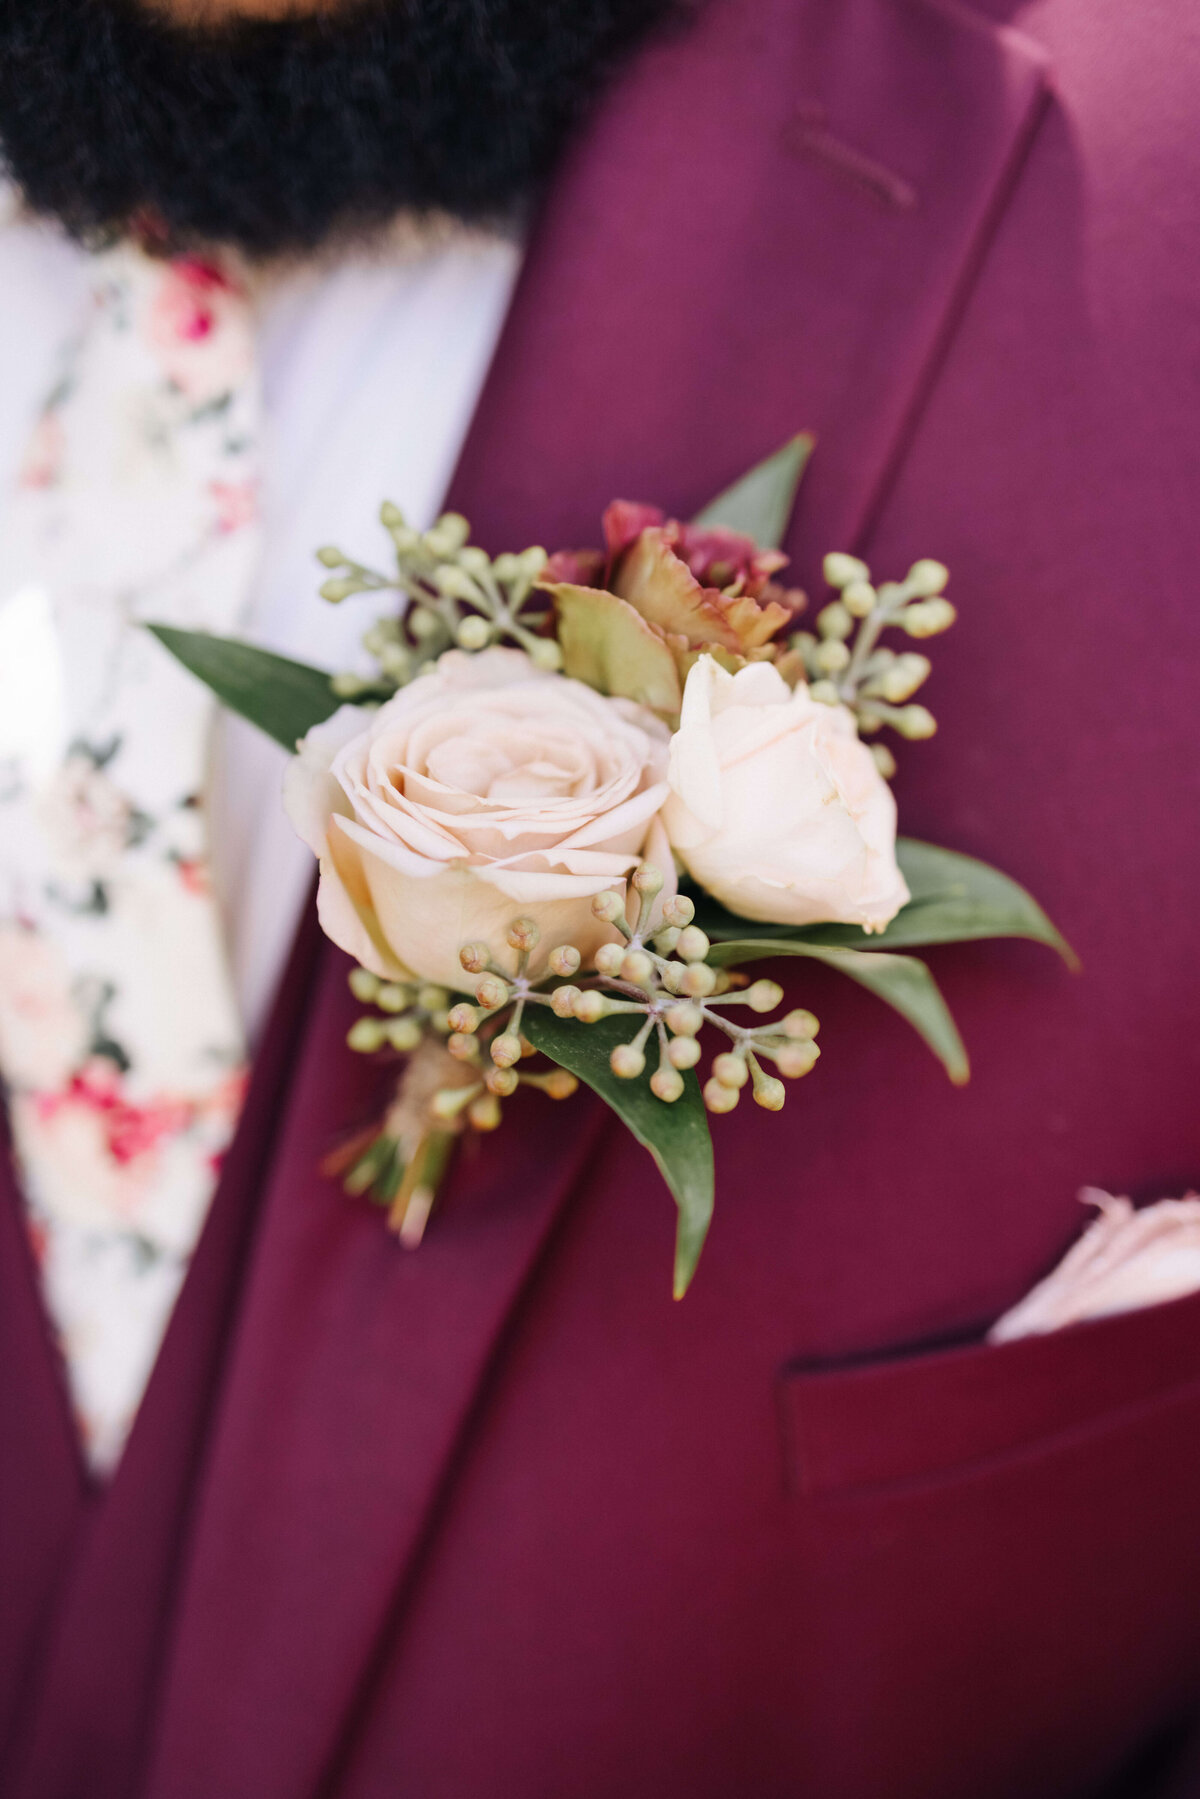 A groom in burgundy suit with a rose and lisianthus boutonniere